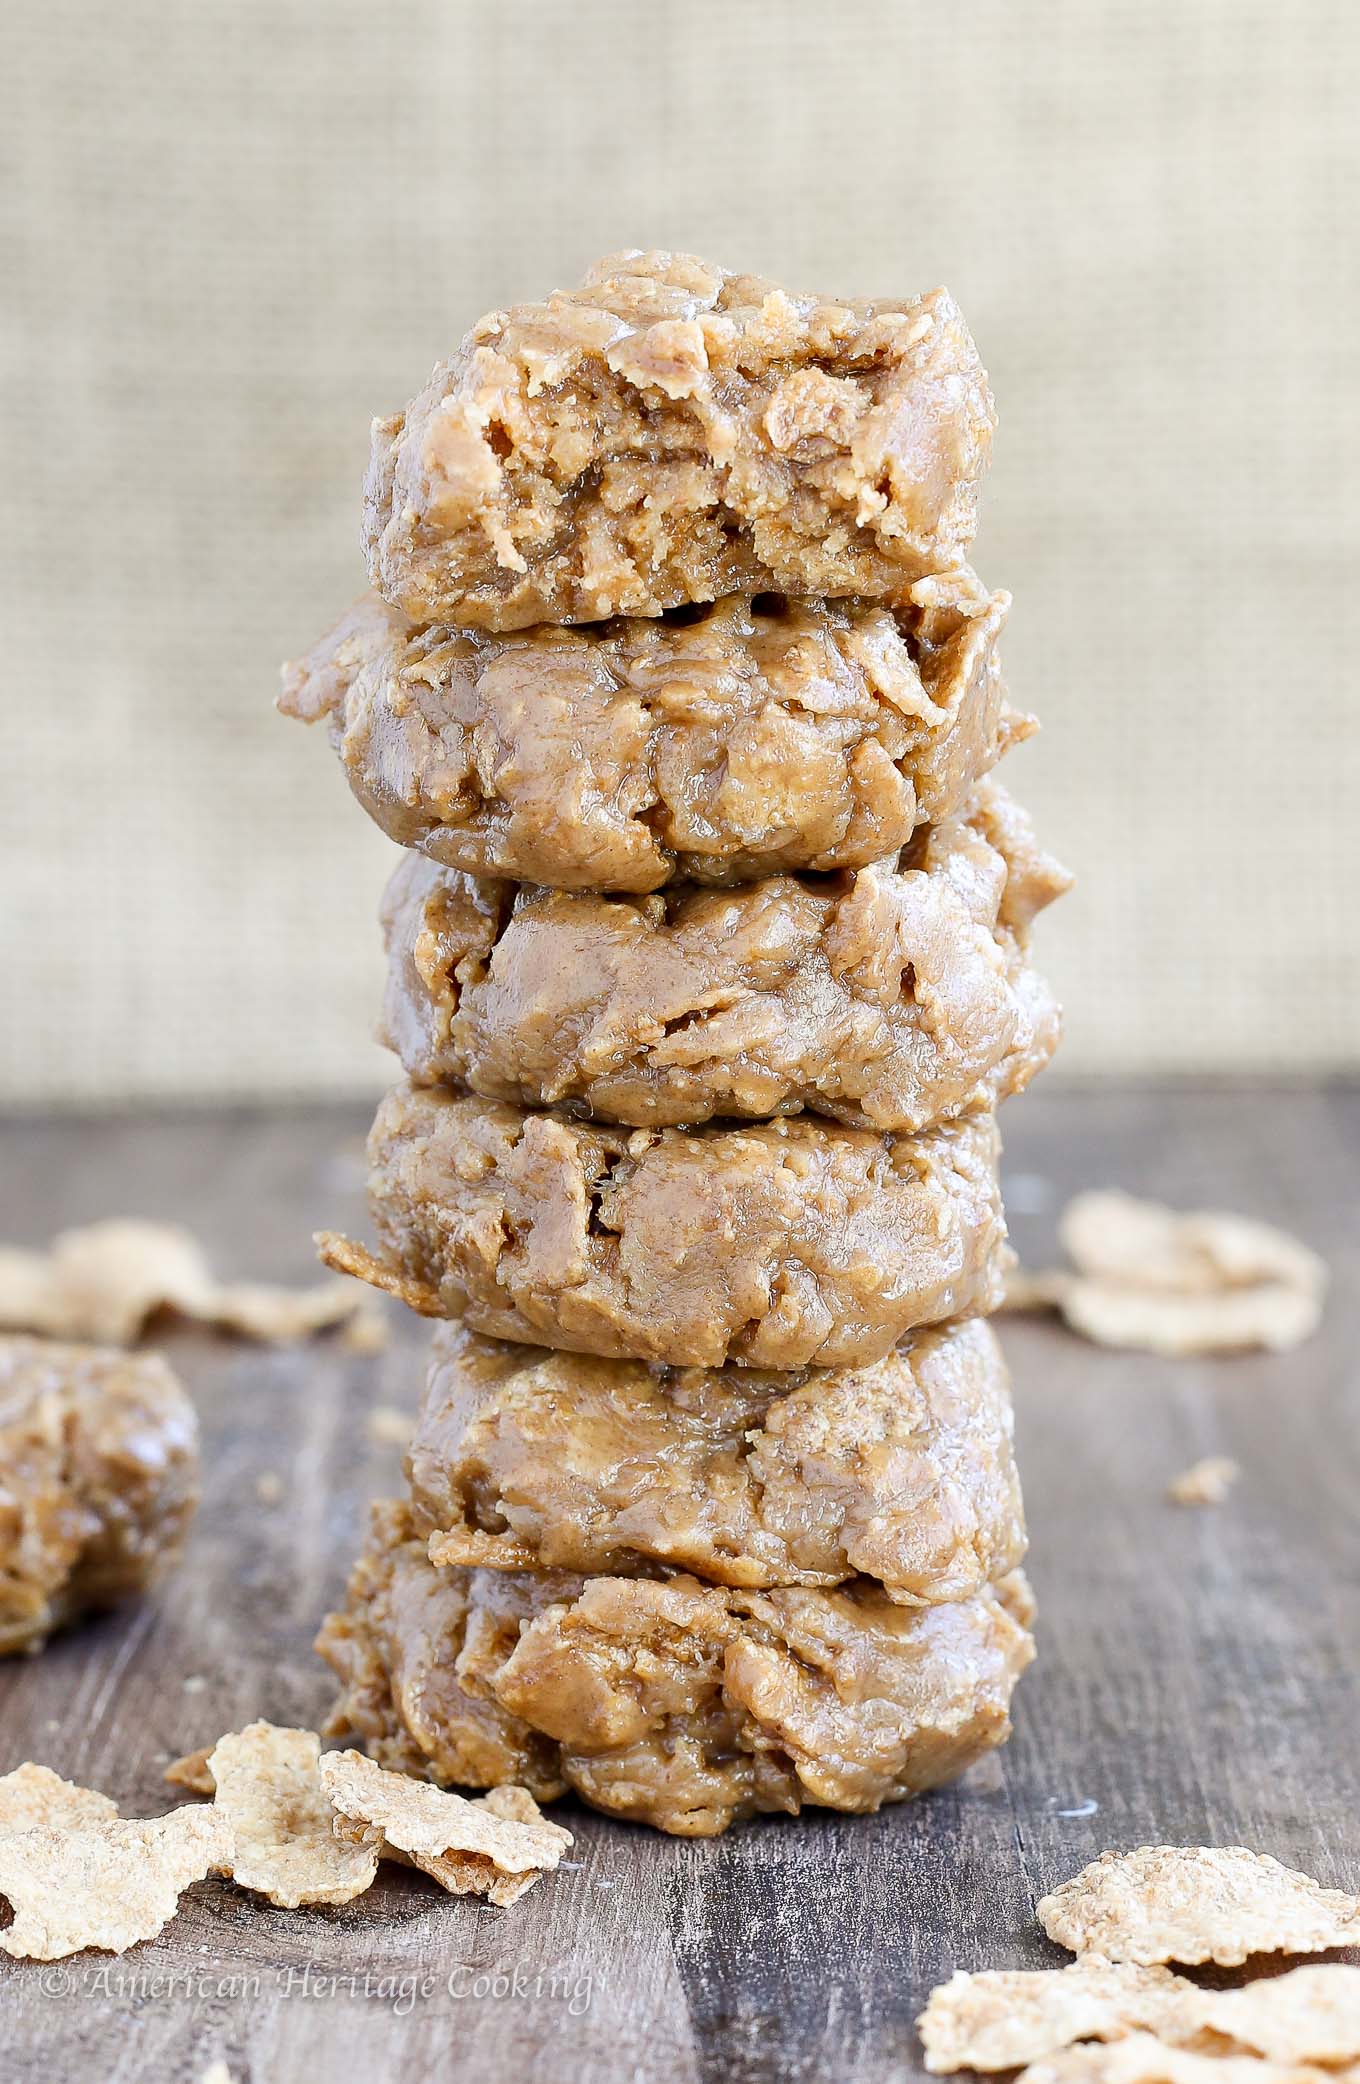 These 5 ingredient 0No Bake Peanut Butter Cookies are soft and crunchy and chewy all at the same time! The sweet peanut butter flavor will have you reaching for another! 